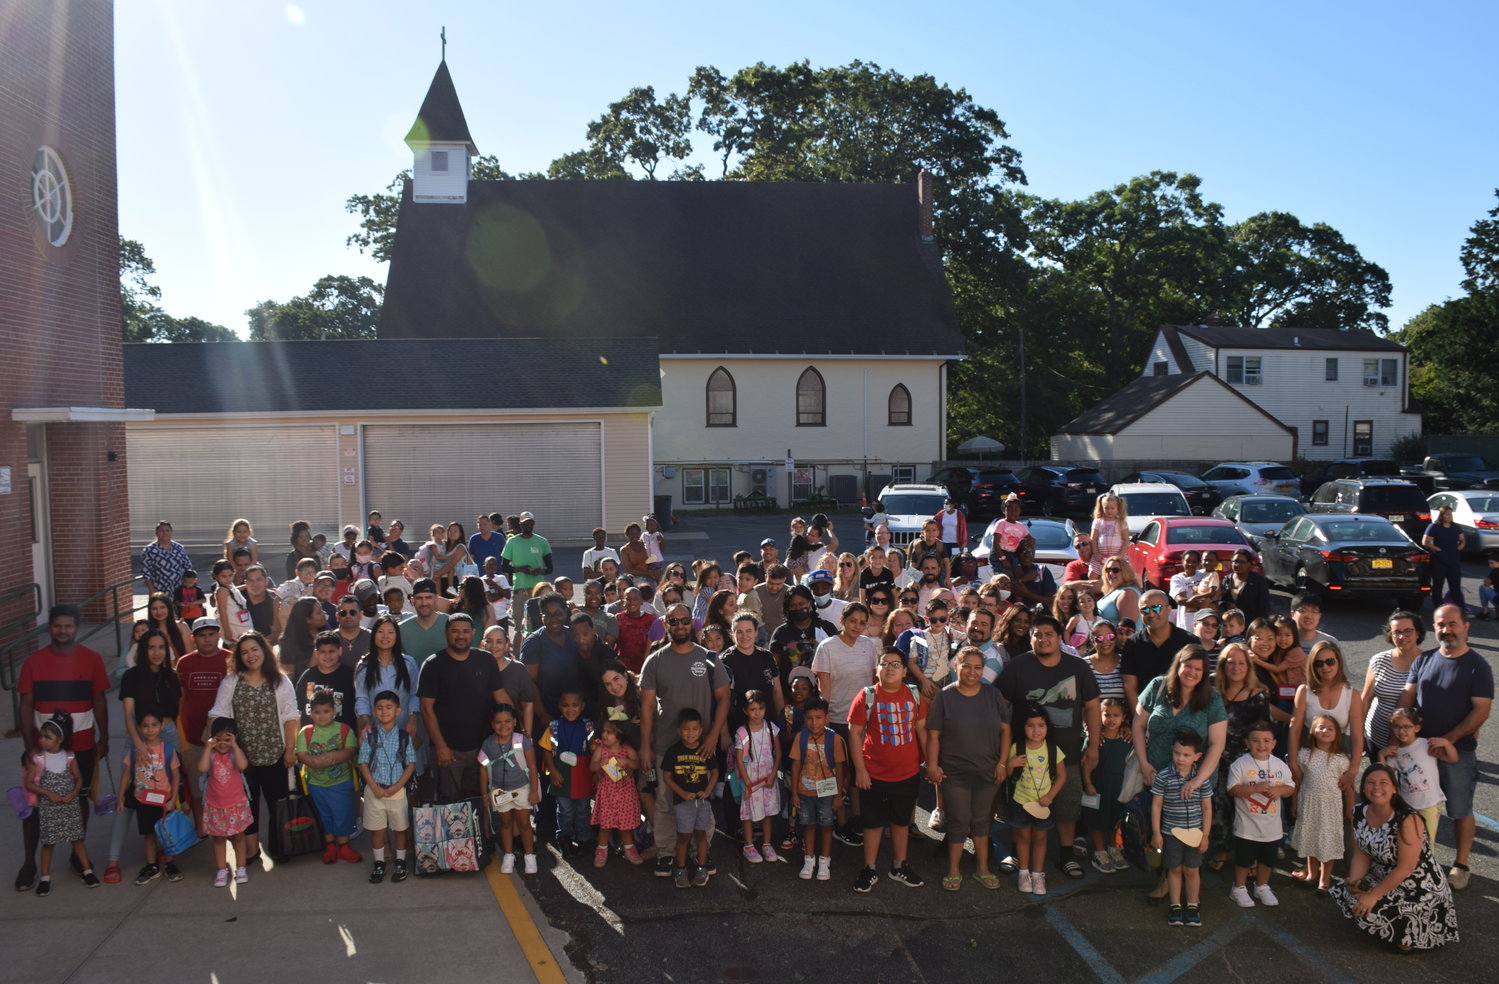 Chestnut Street School welcomed the West Hempstead Class of 2035 to the start of the 2022-23 school year on Sept. 1.